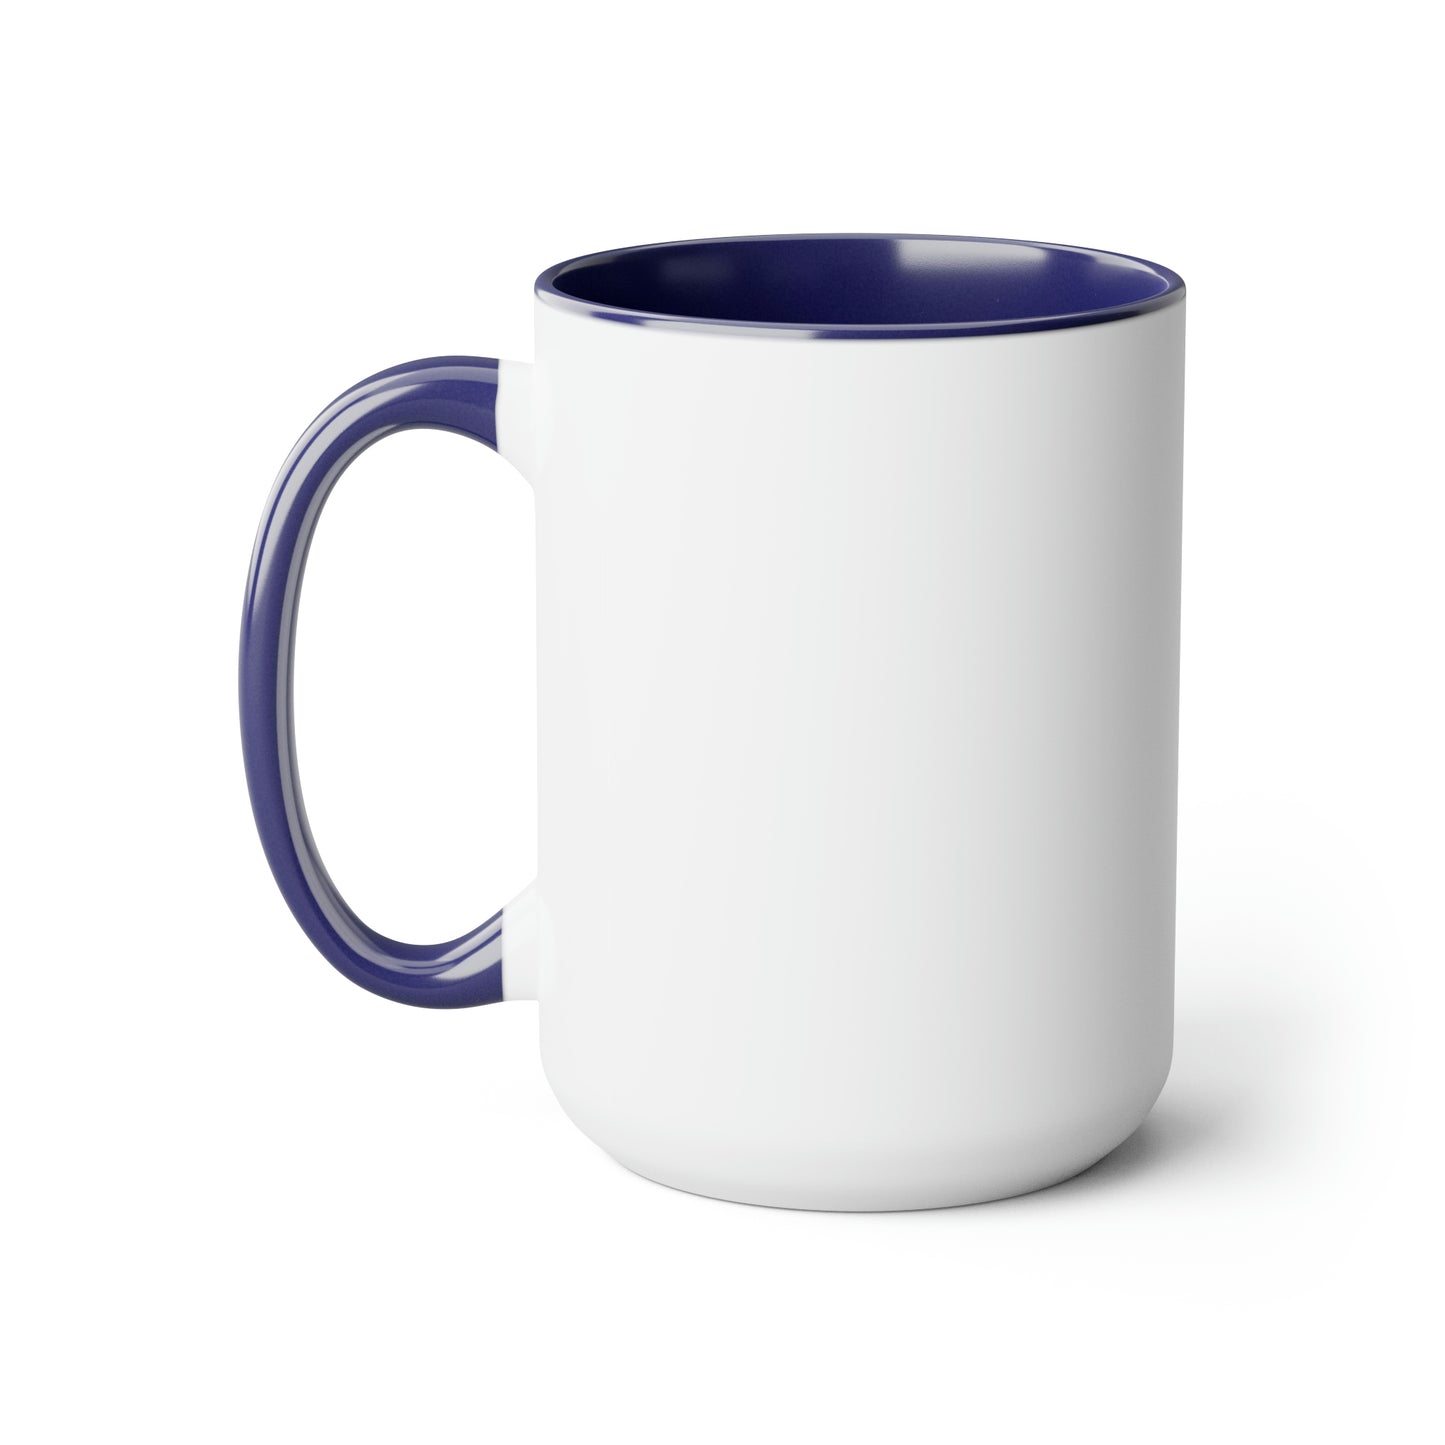 There Goes Our Hero Two-Tone Coffee Mugs, 15oz